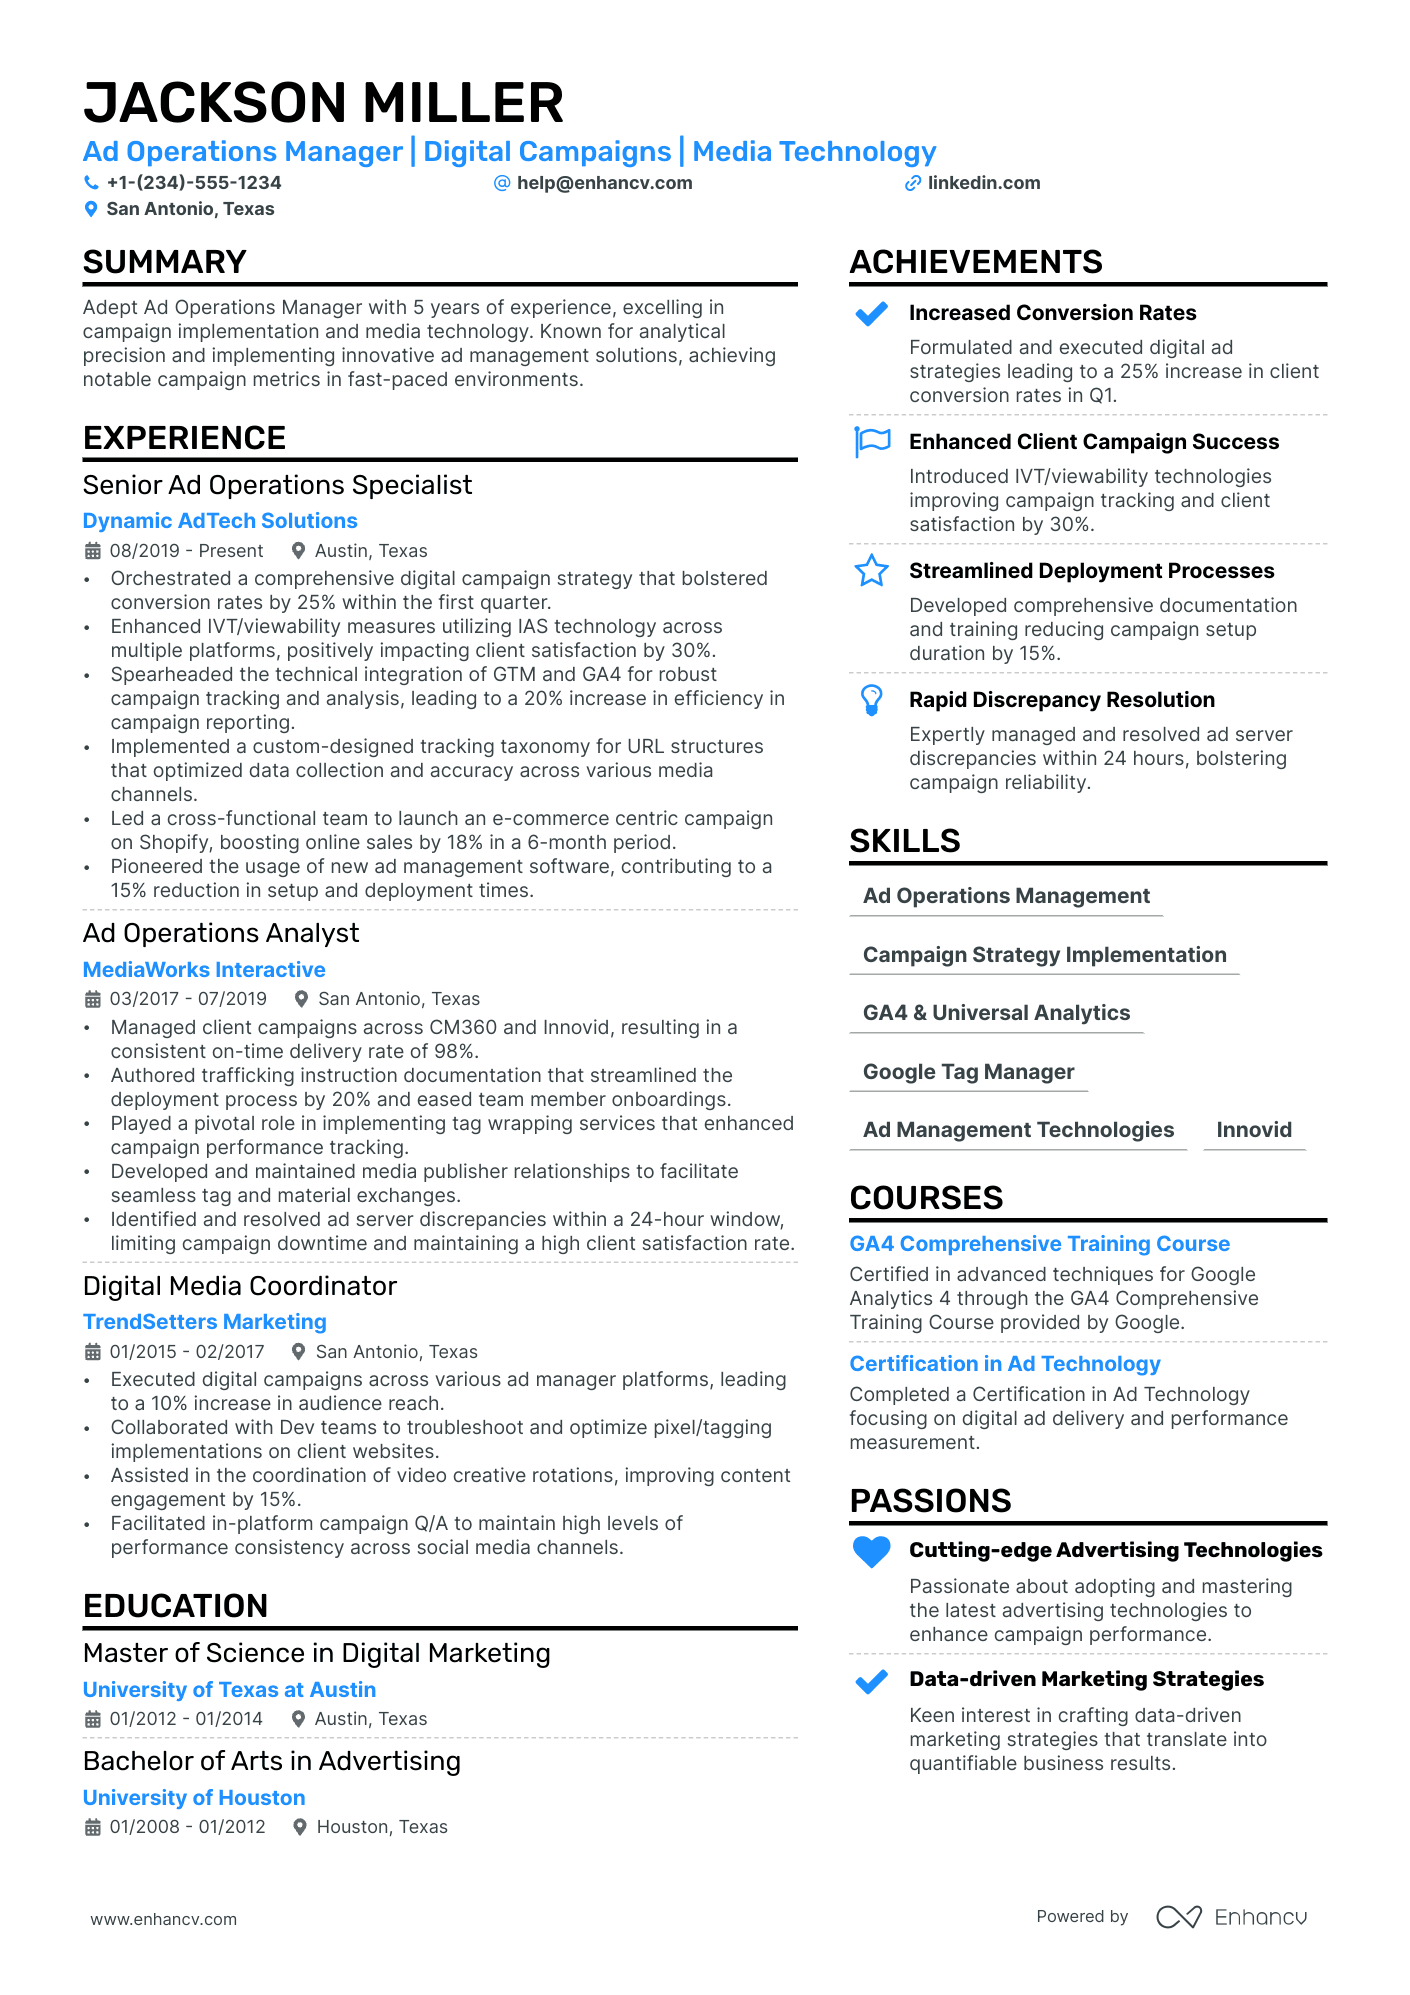 Ad Operations Manager resume example